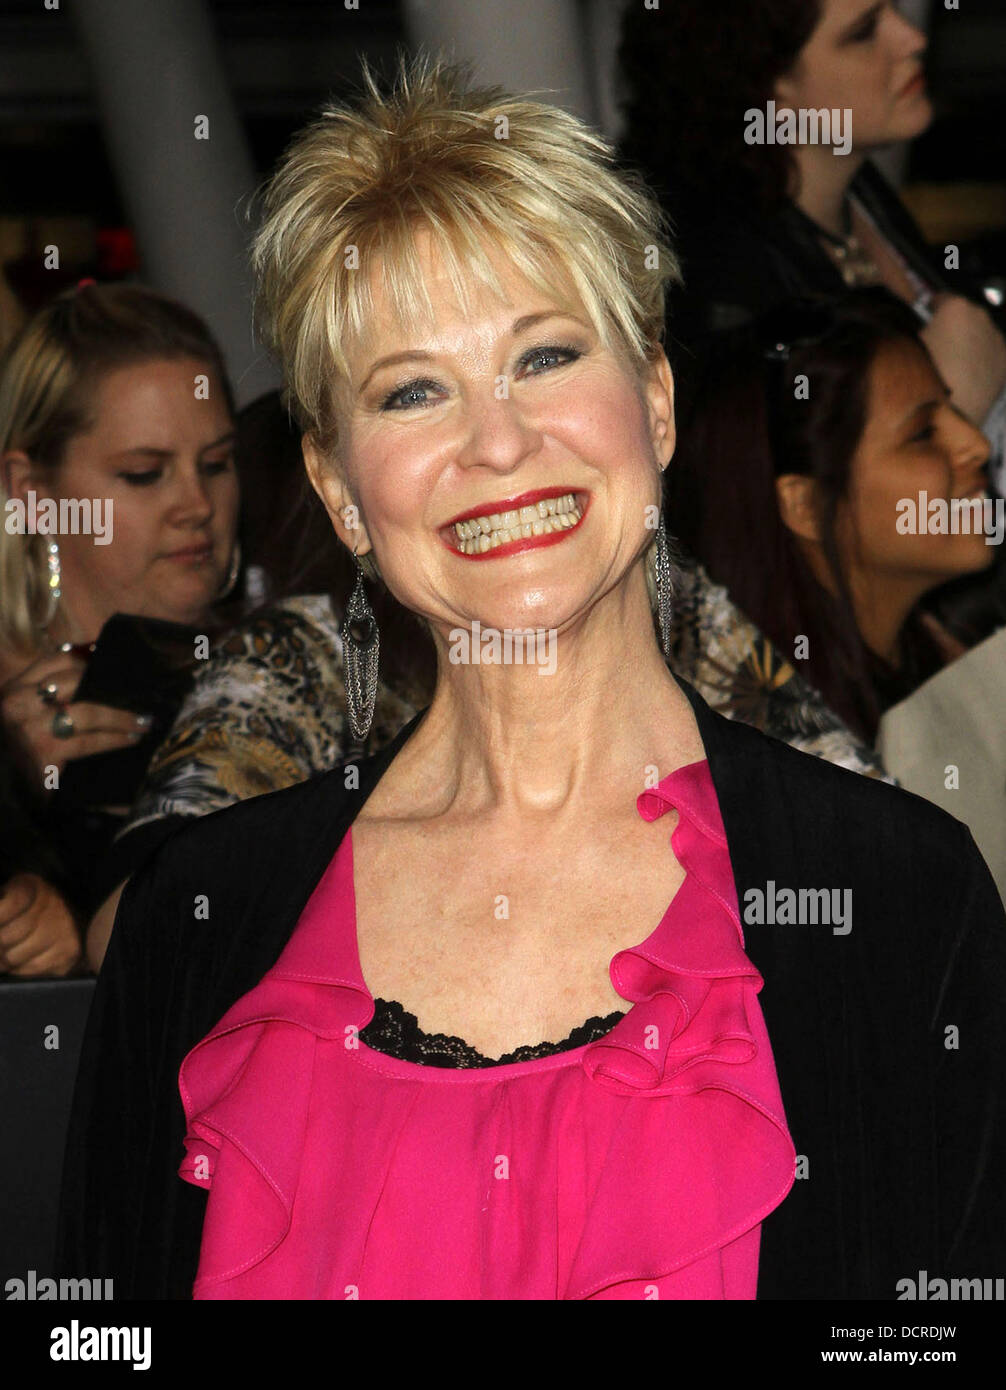 Dee Wallace Stone The Twilight Saga: Breaking Dawn - Part 1 World Premiere held at Nokia Theatre L.A. Live Los Angeles, California - 14.11.11 Stock Photo